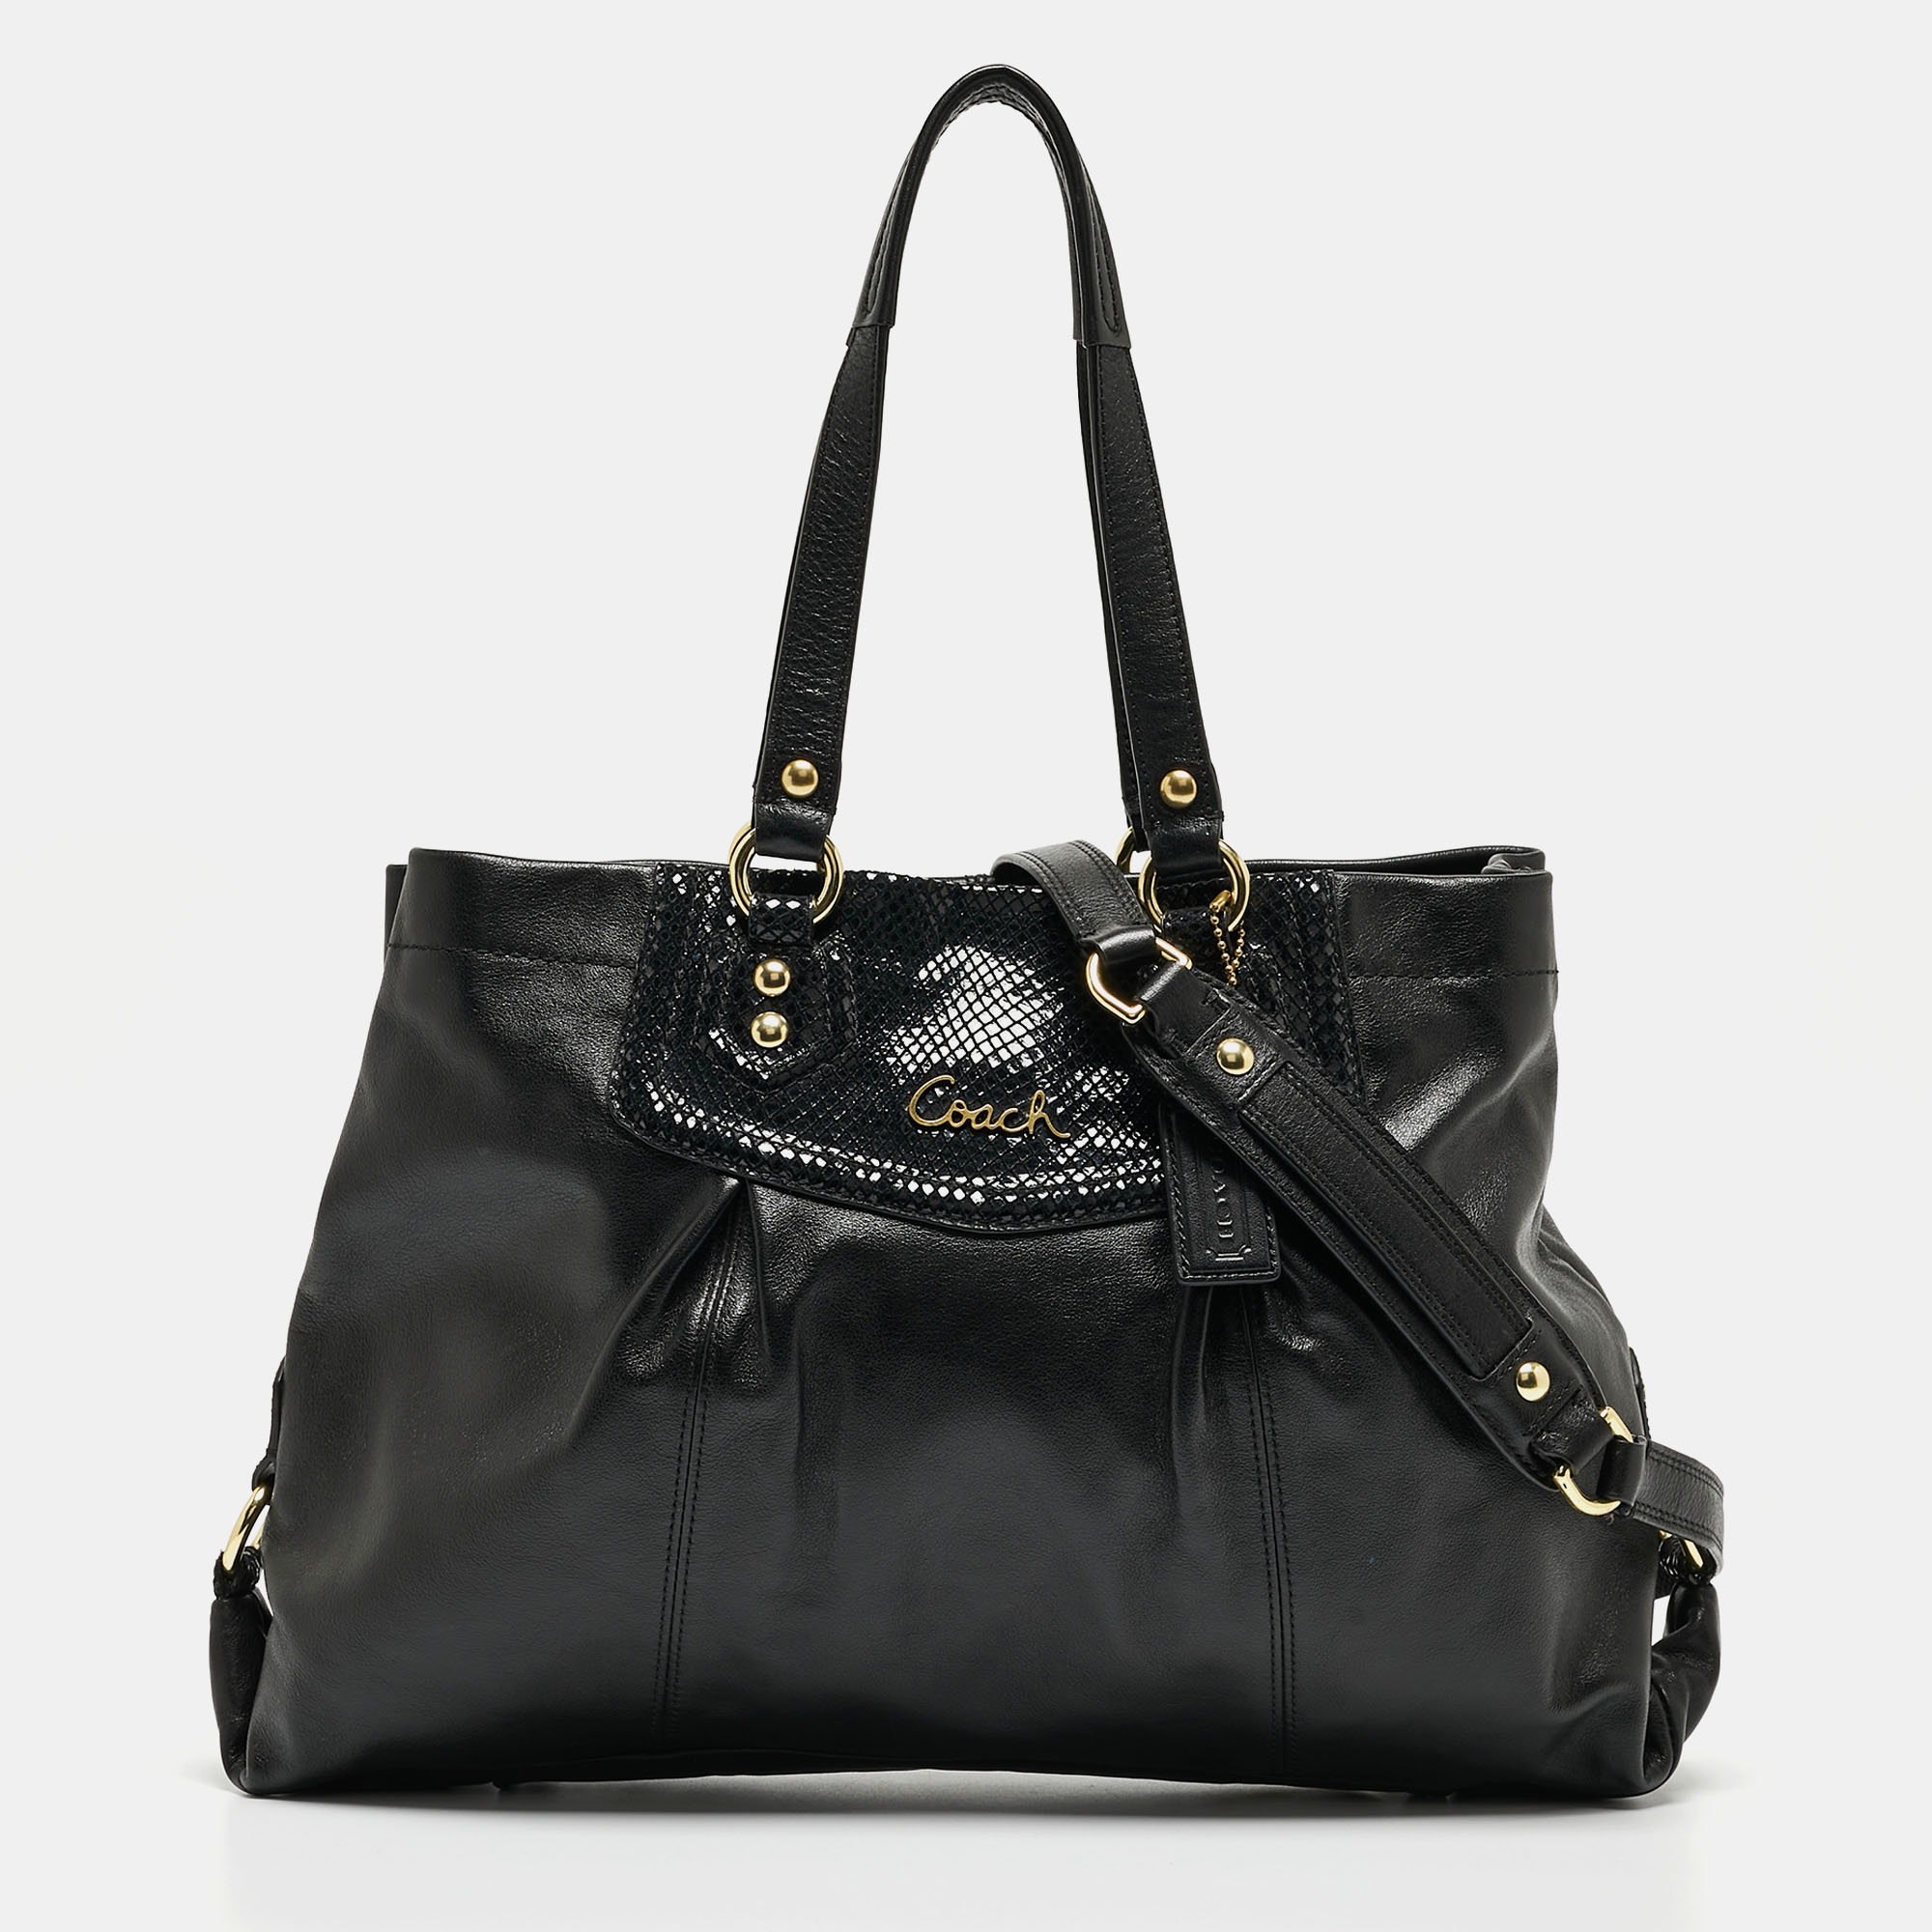 Coach Black Leather And Snakeskin Embossed Leather Ashley Tote